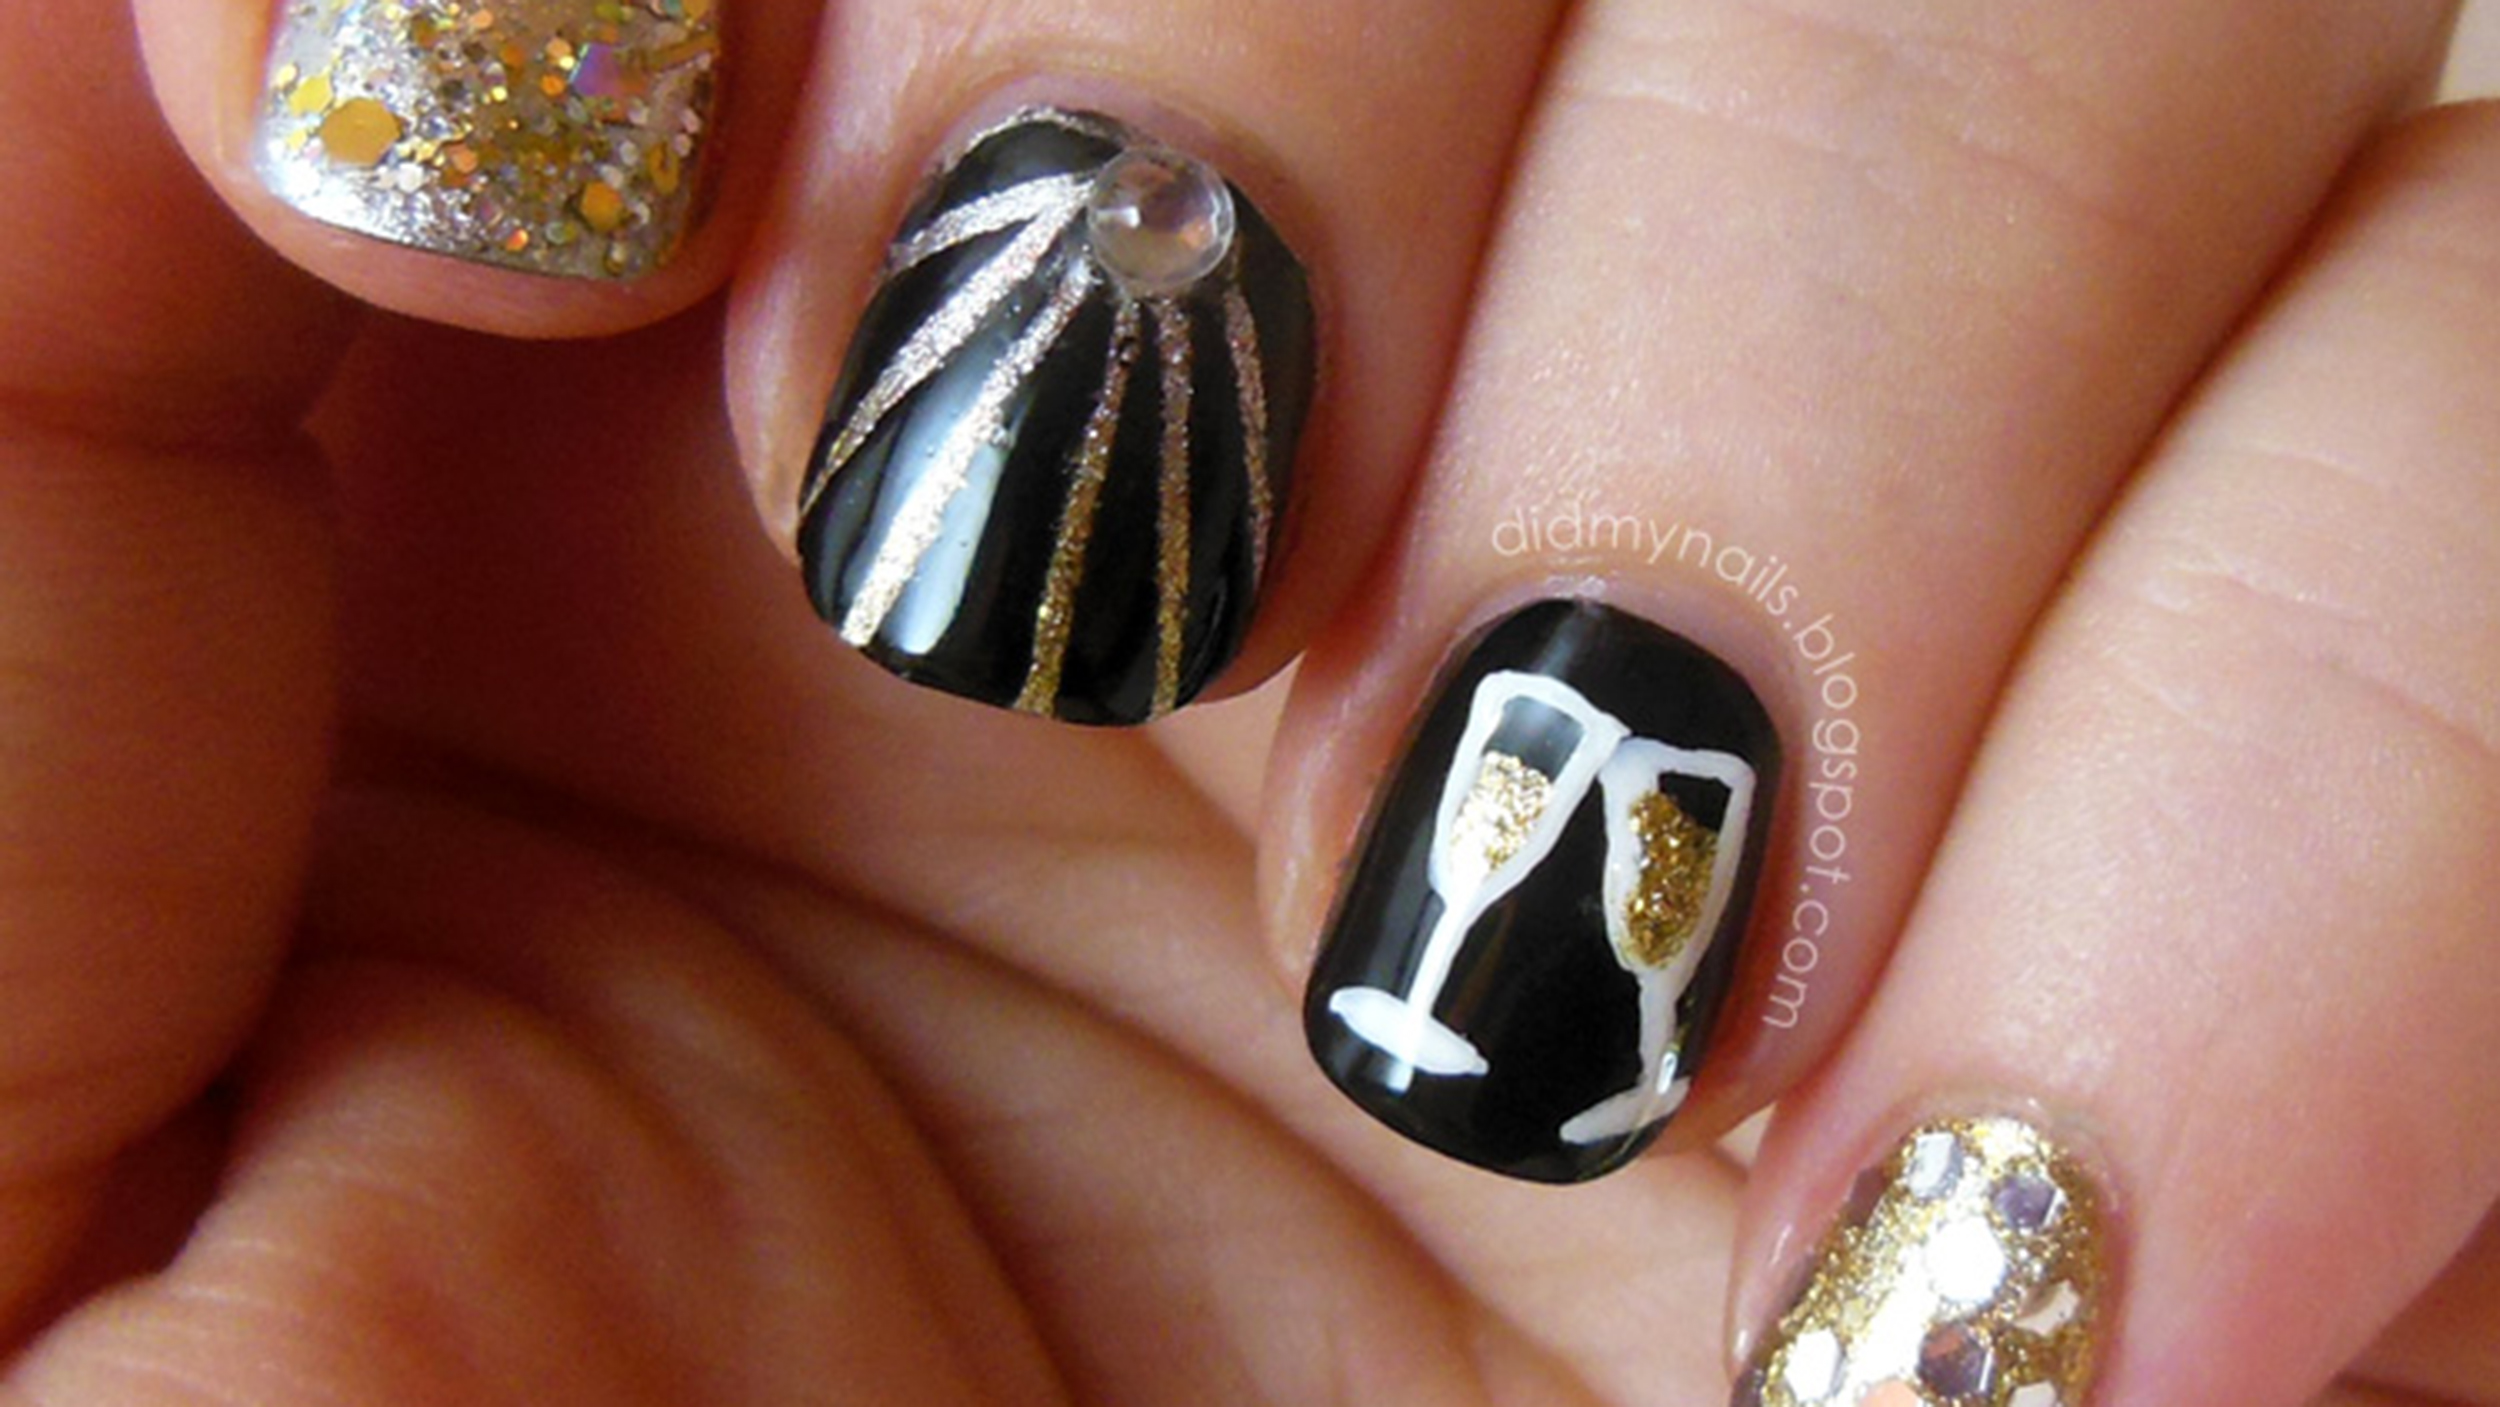 New Year's Eve nail art ideas as pretty as your party dress - TODAY.com